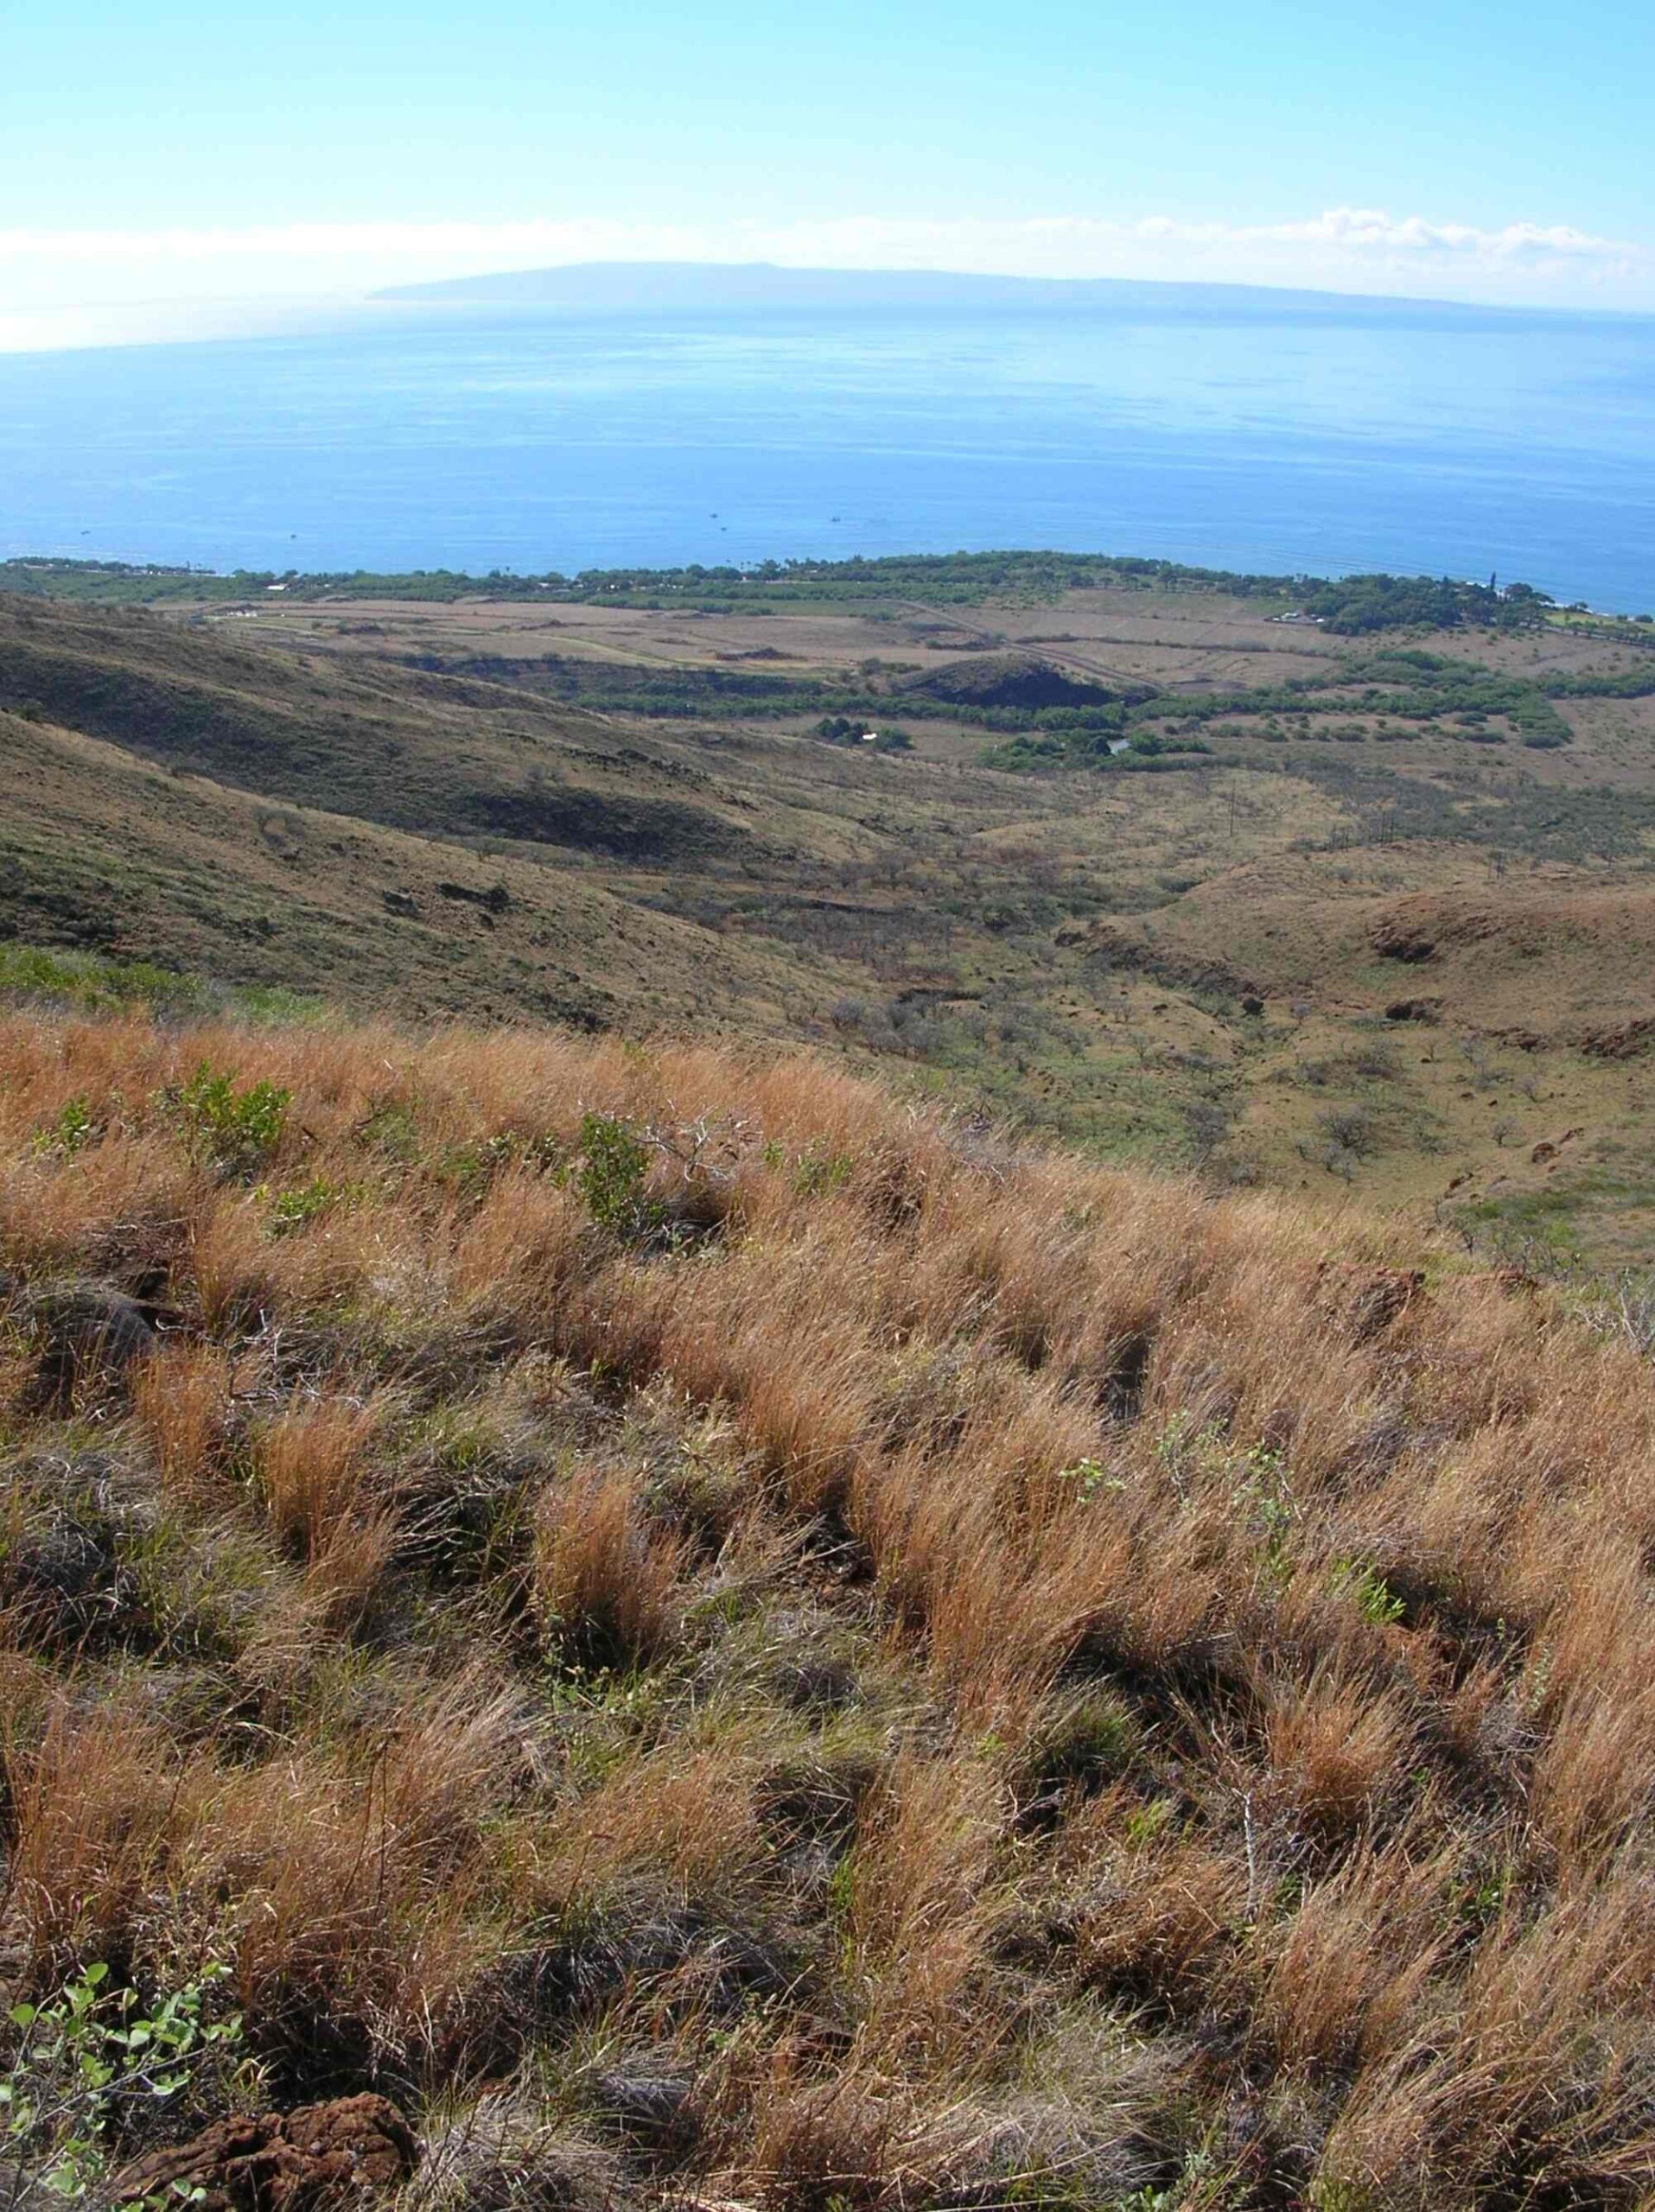 Photograph showing tufts of tanglehead grass growing on a hillside in the foreground. The tufts of grass appear low and yellow-brown, indicating that the are dry.